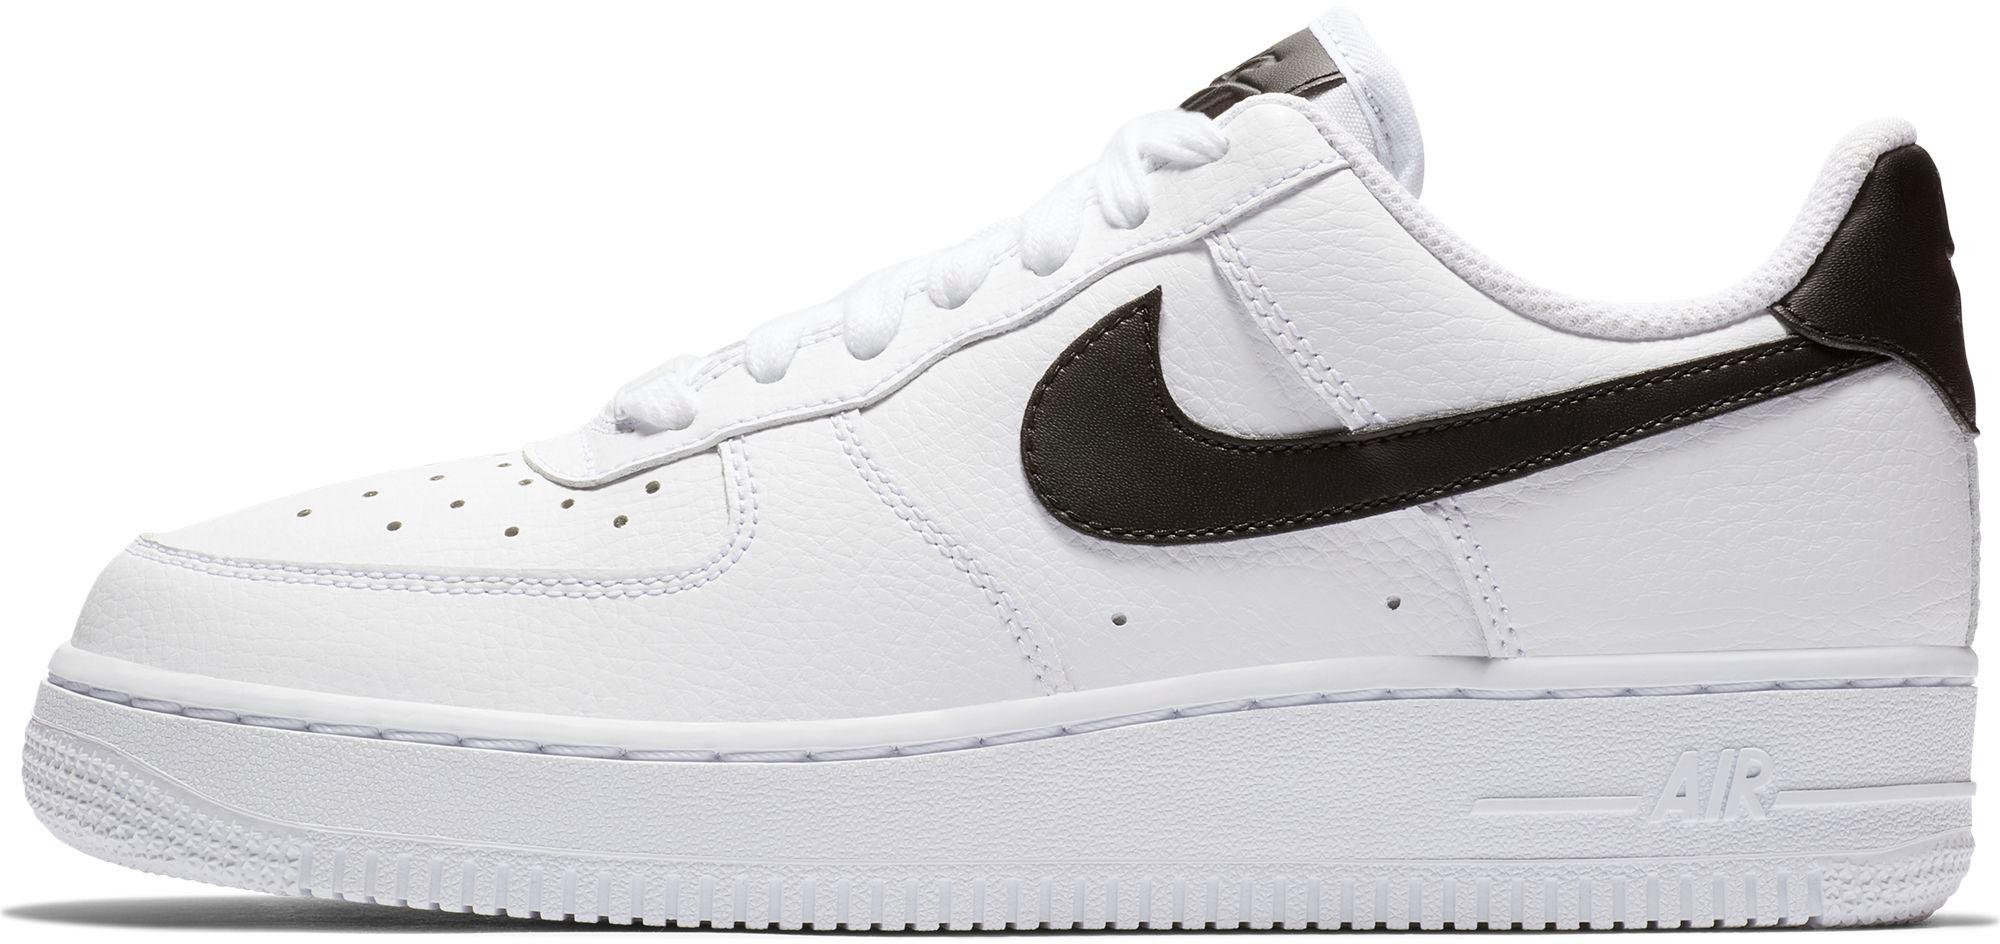 women's nike air force 1 white and black